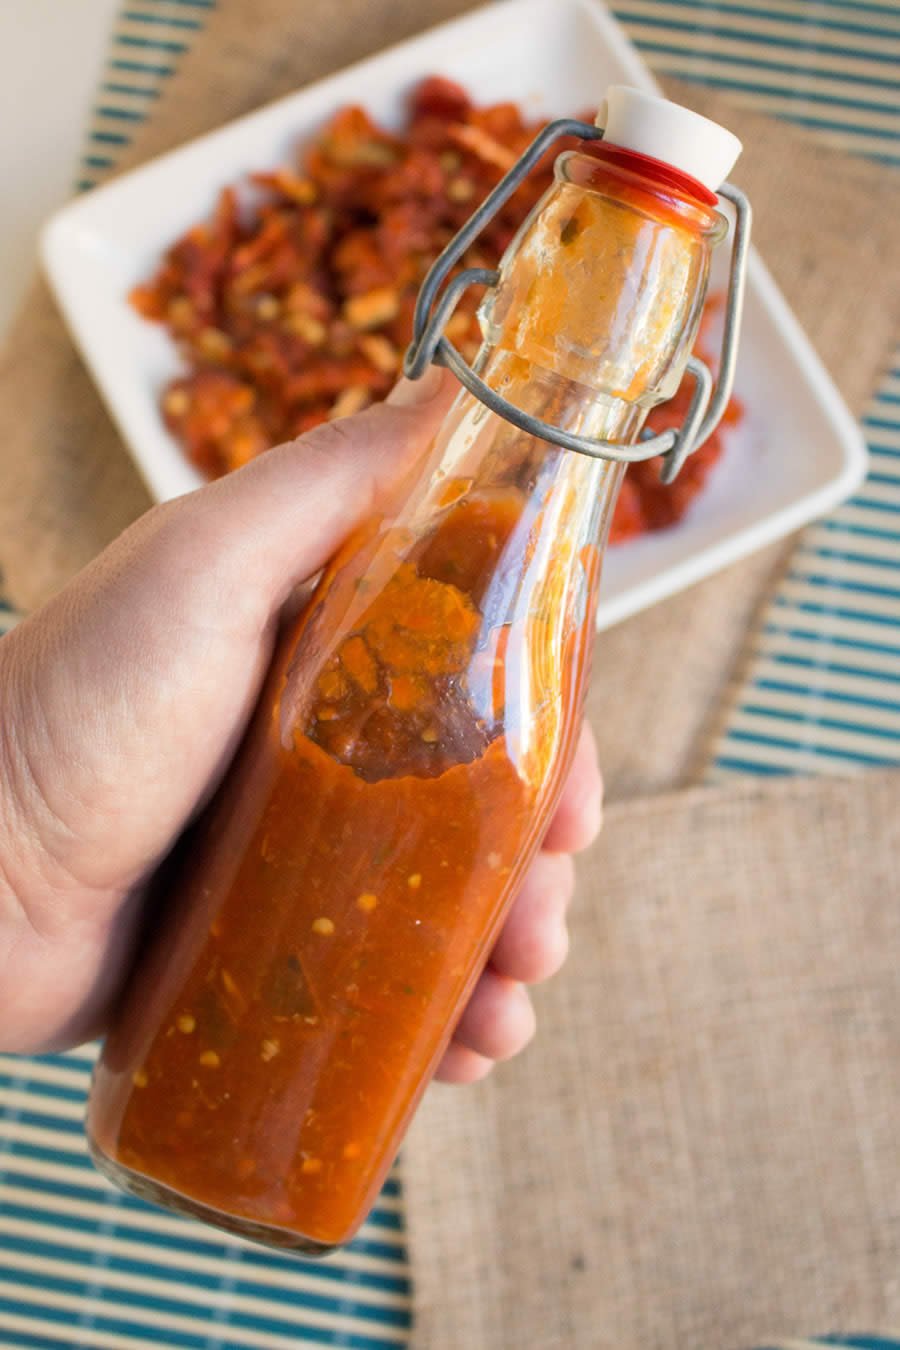 Holding a bottle full of the delicious Homemade Cilantro-Habanero Hot Sauce 